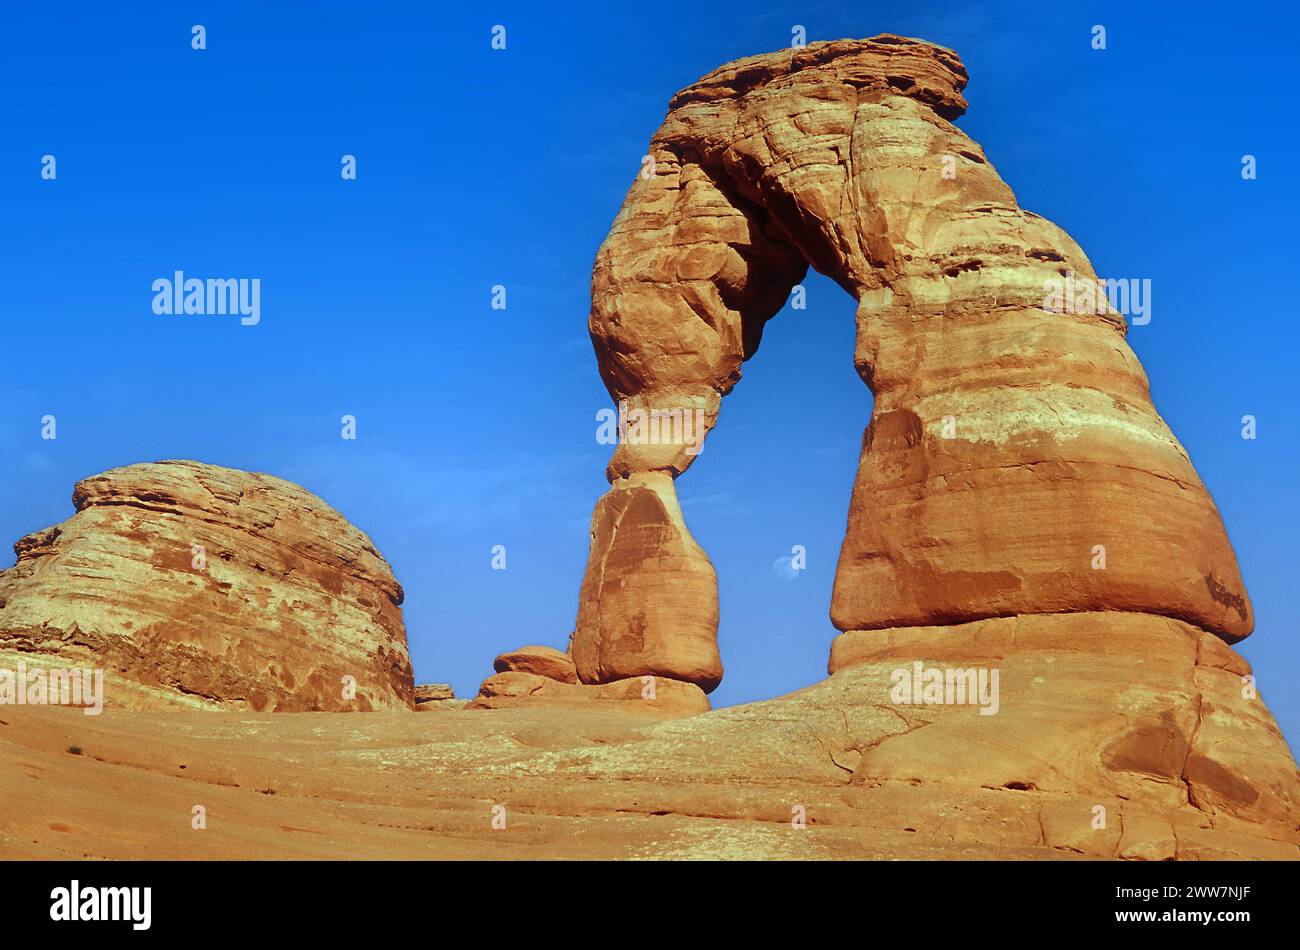 USA, Utah, Arches National Park, Delicate Arch, Rock Arch, Felsen, Sandstein, Formation, Arches National Park, Utah, USA Stockfoto